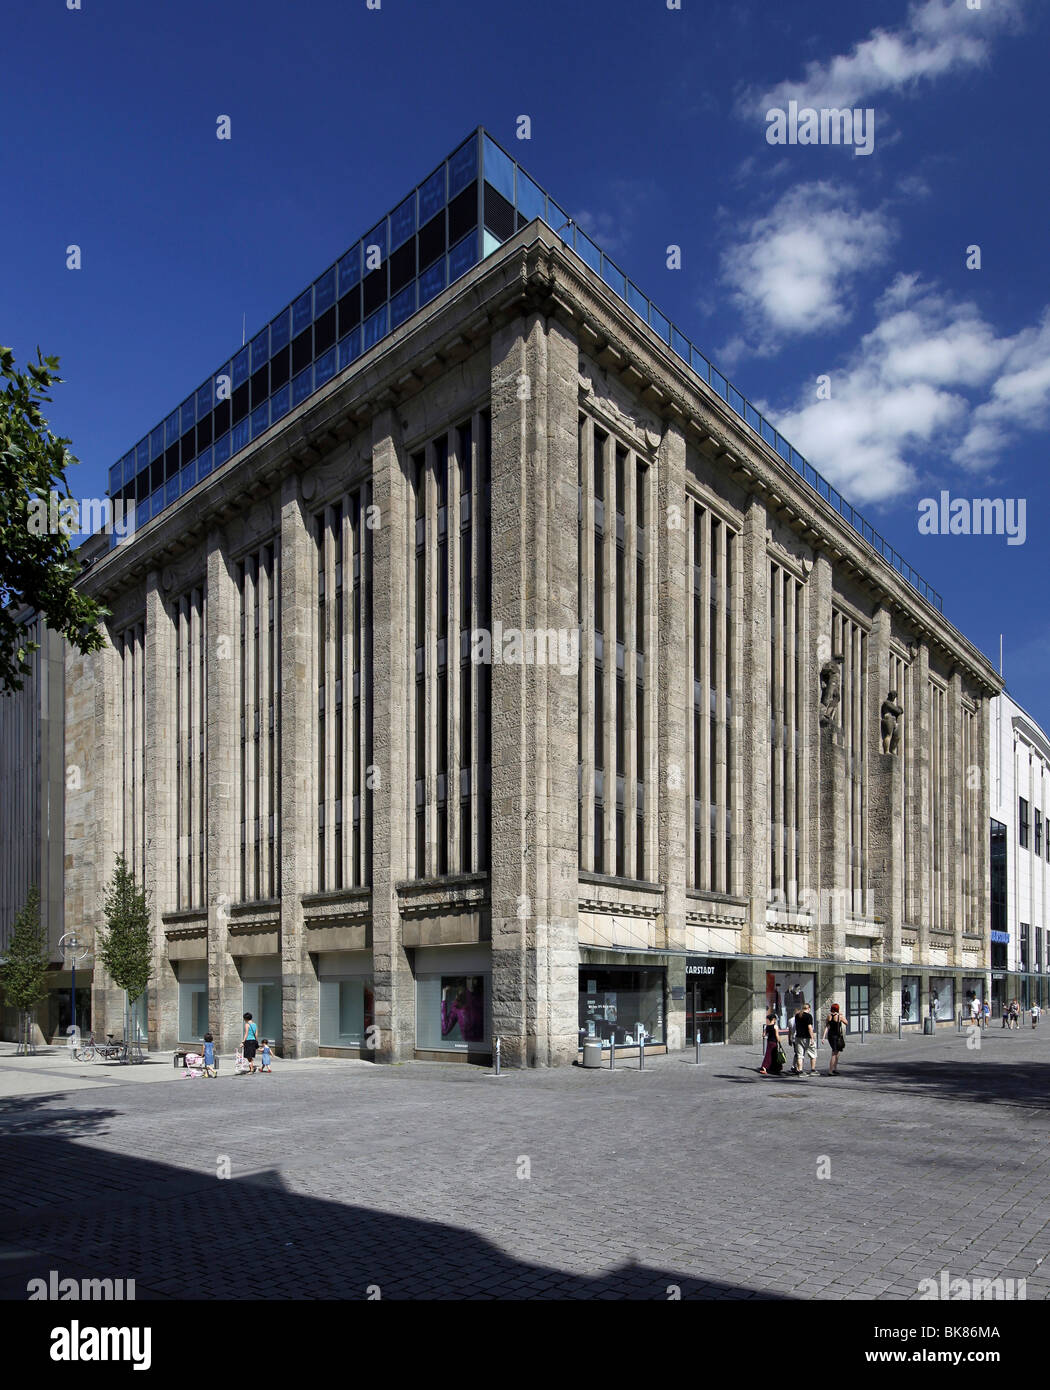 Facade of the former department store Theodor Althoff, now Karstadt department store, Dortmund, North Rhine-Westphalia, Germany Stock Photo